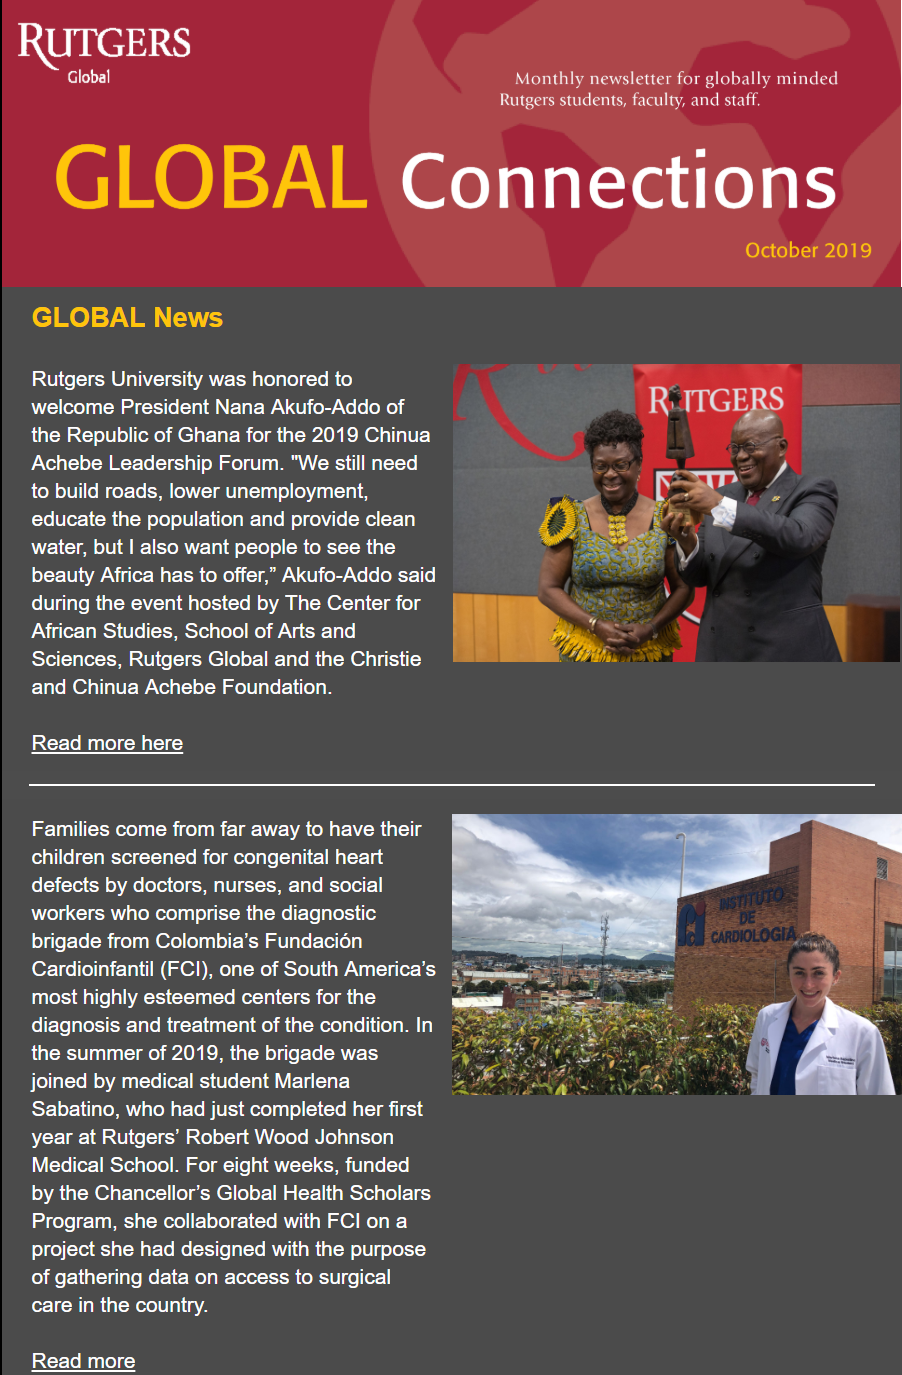 Thumbnail of October 2019 Global Connections Newsletter